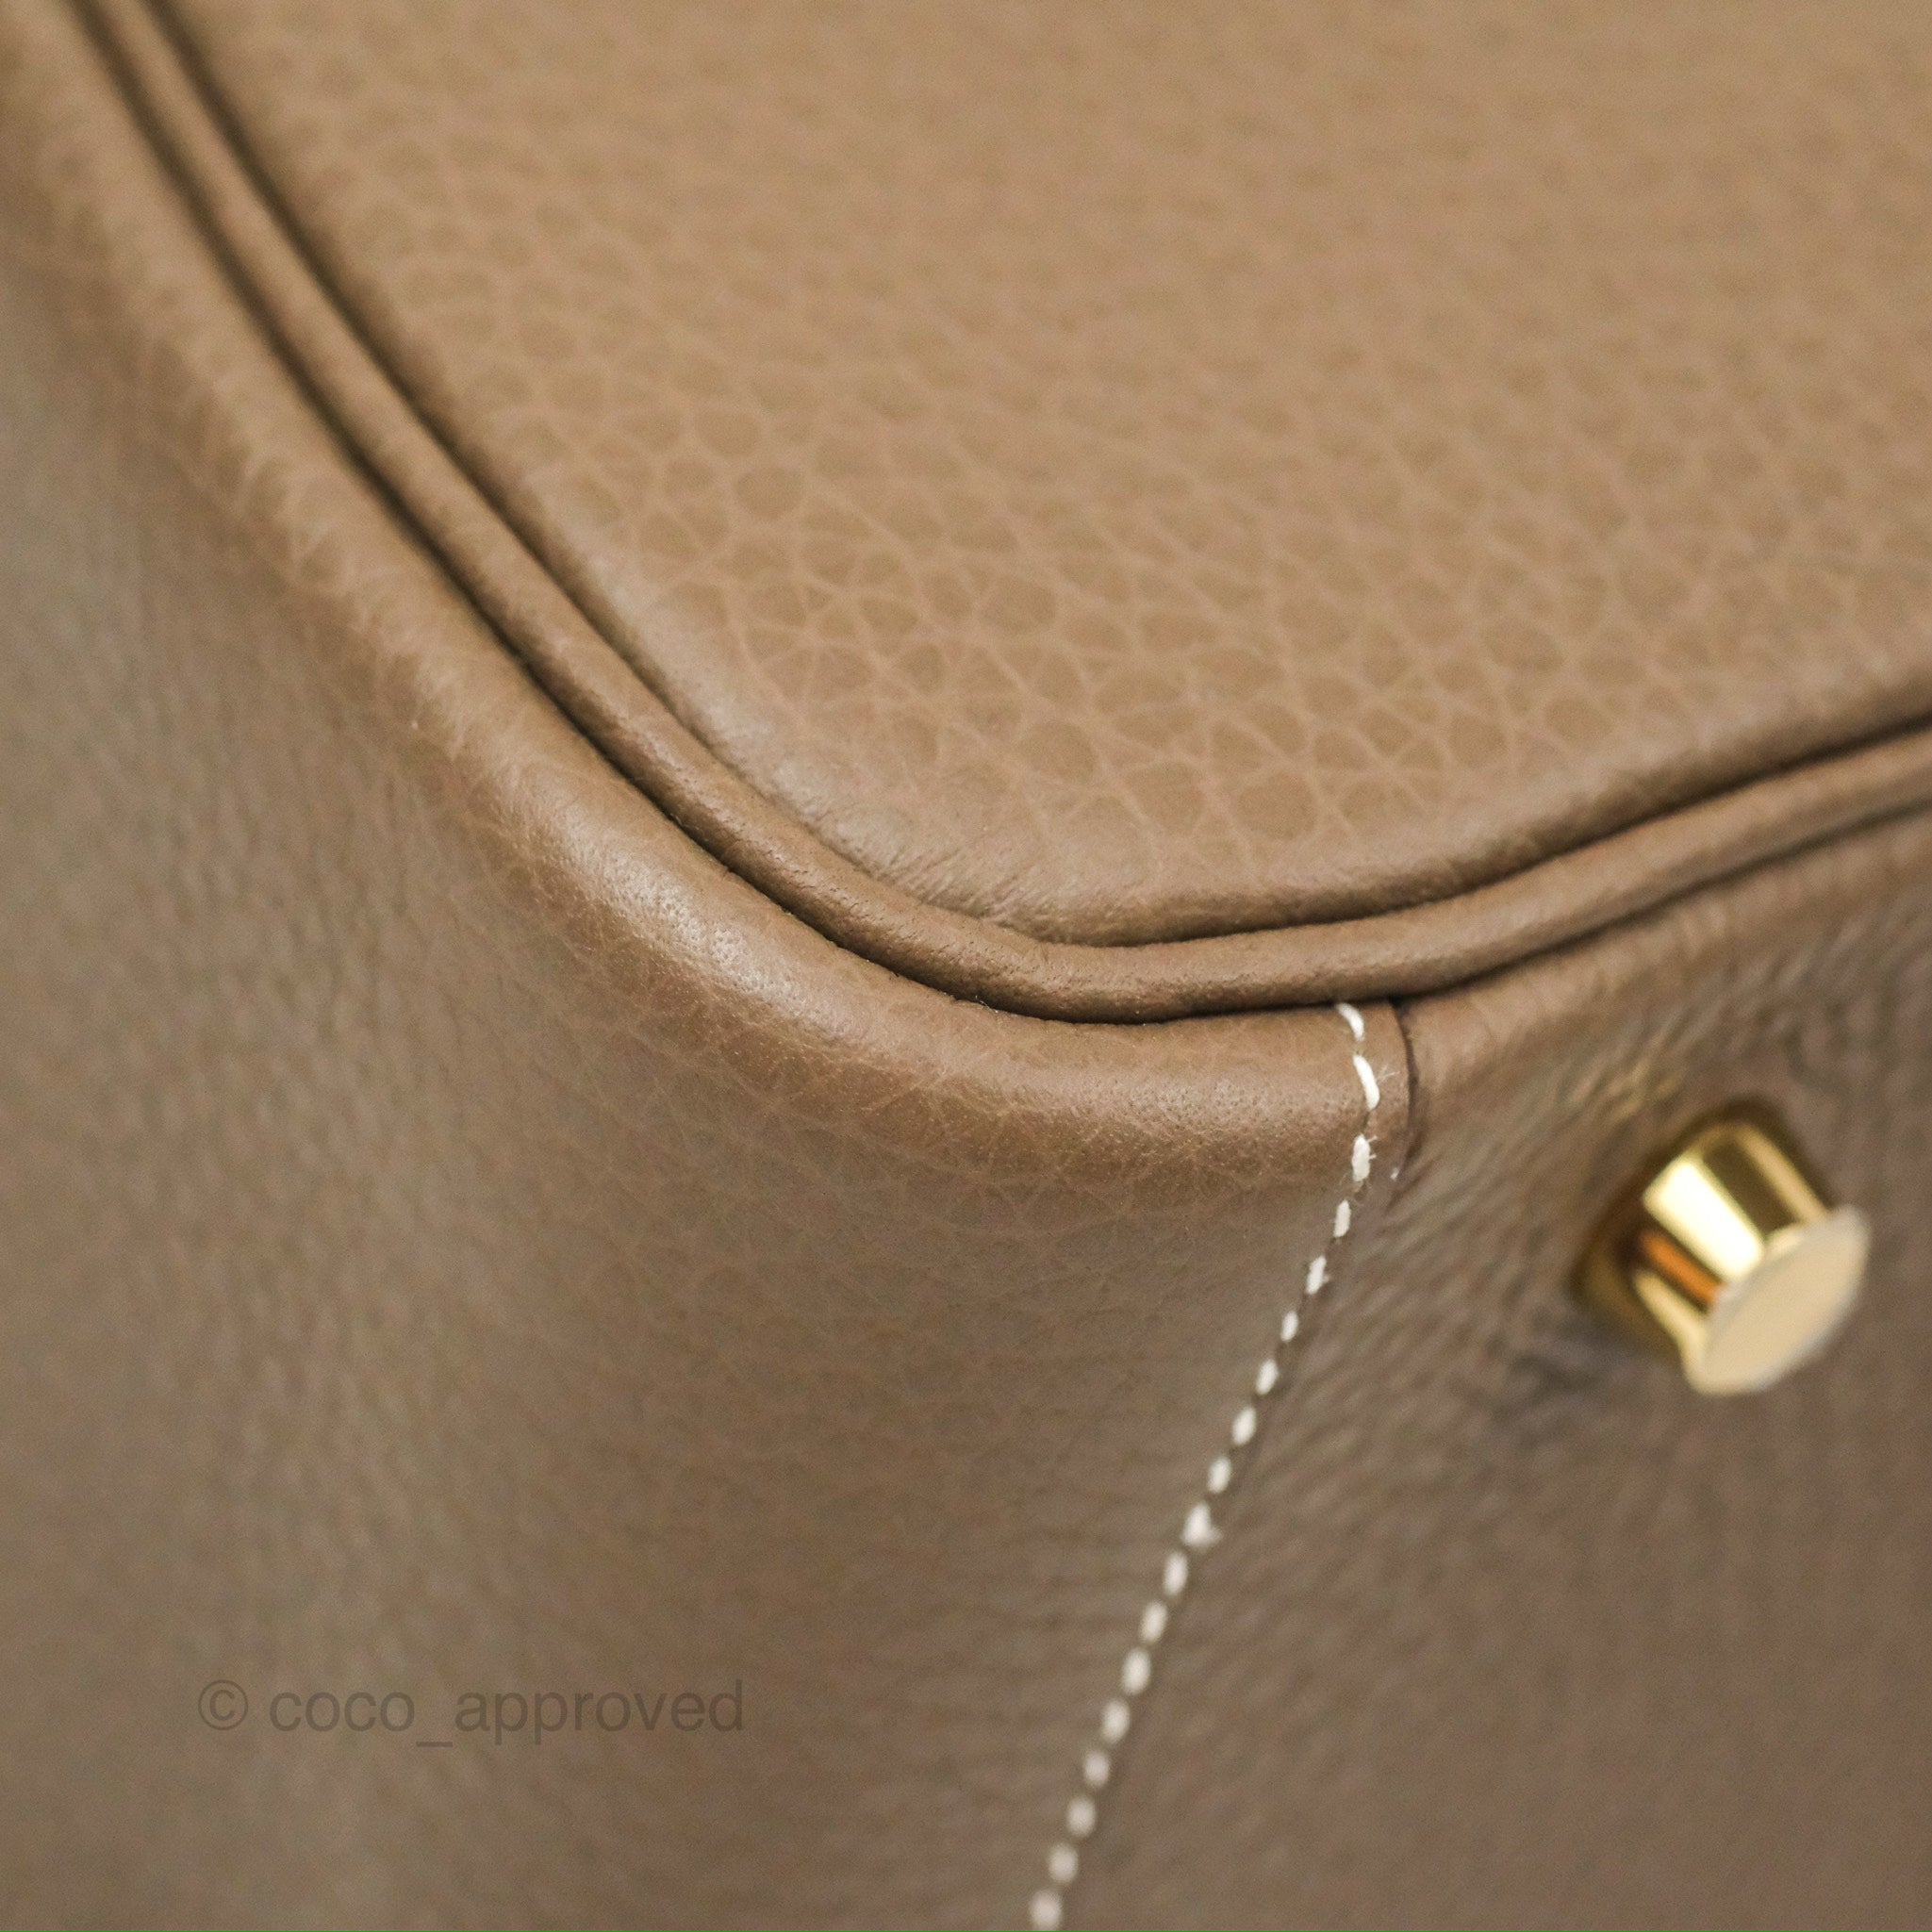 HERMÈS Lindy 30 shoulder bag in Etoupe Clemence leather with Gold hardware  [Consigned]-Ginza Xiaoma – Authentic Hermès Boutique